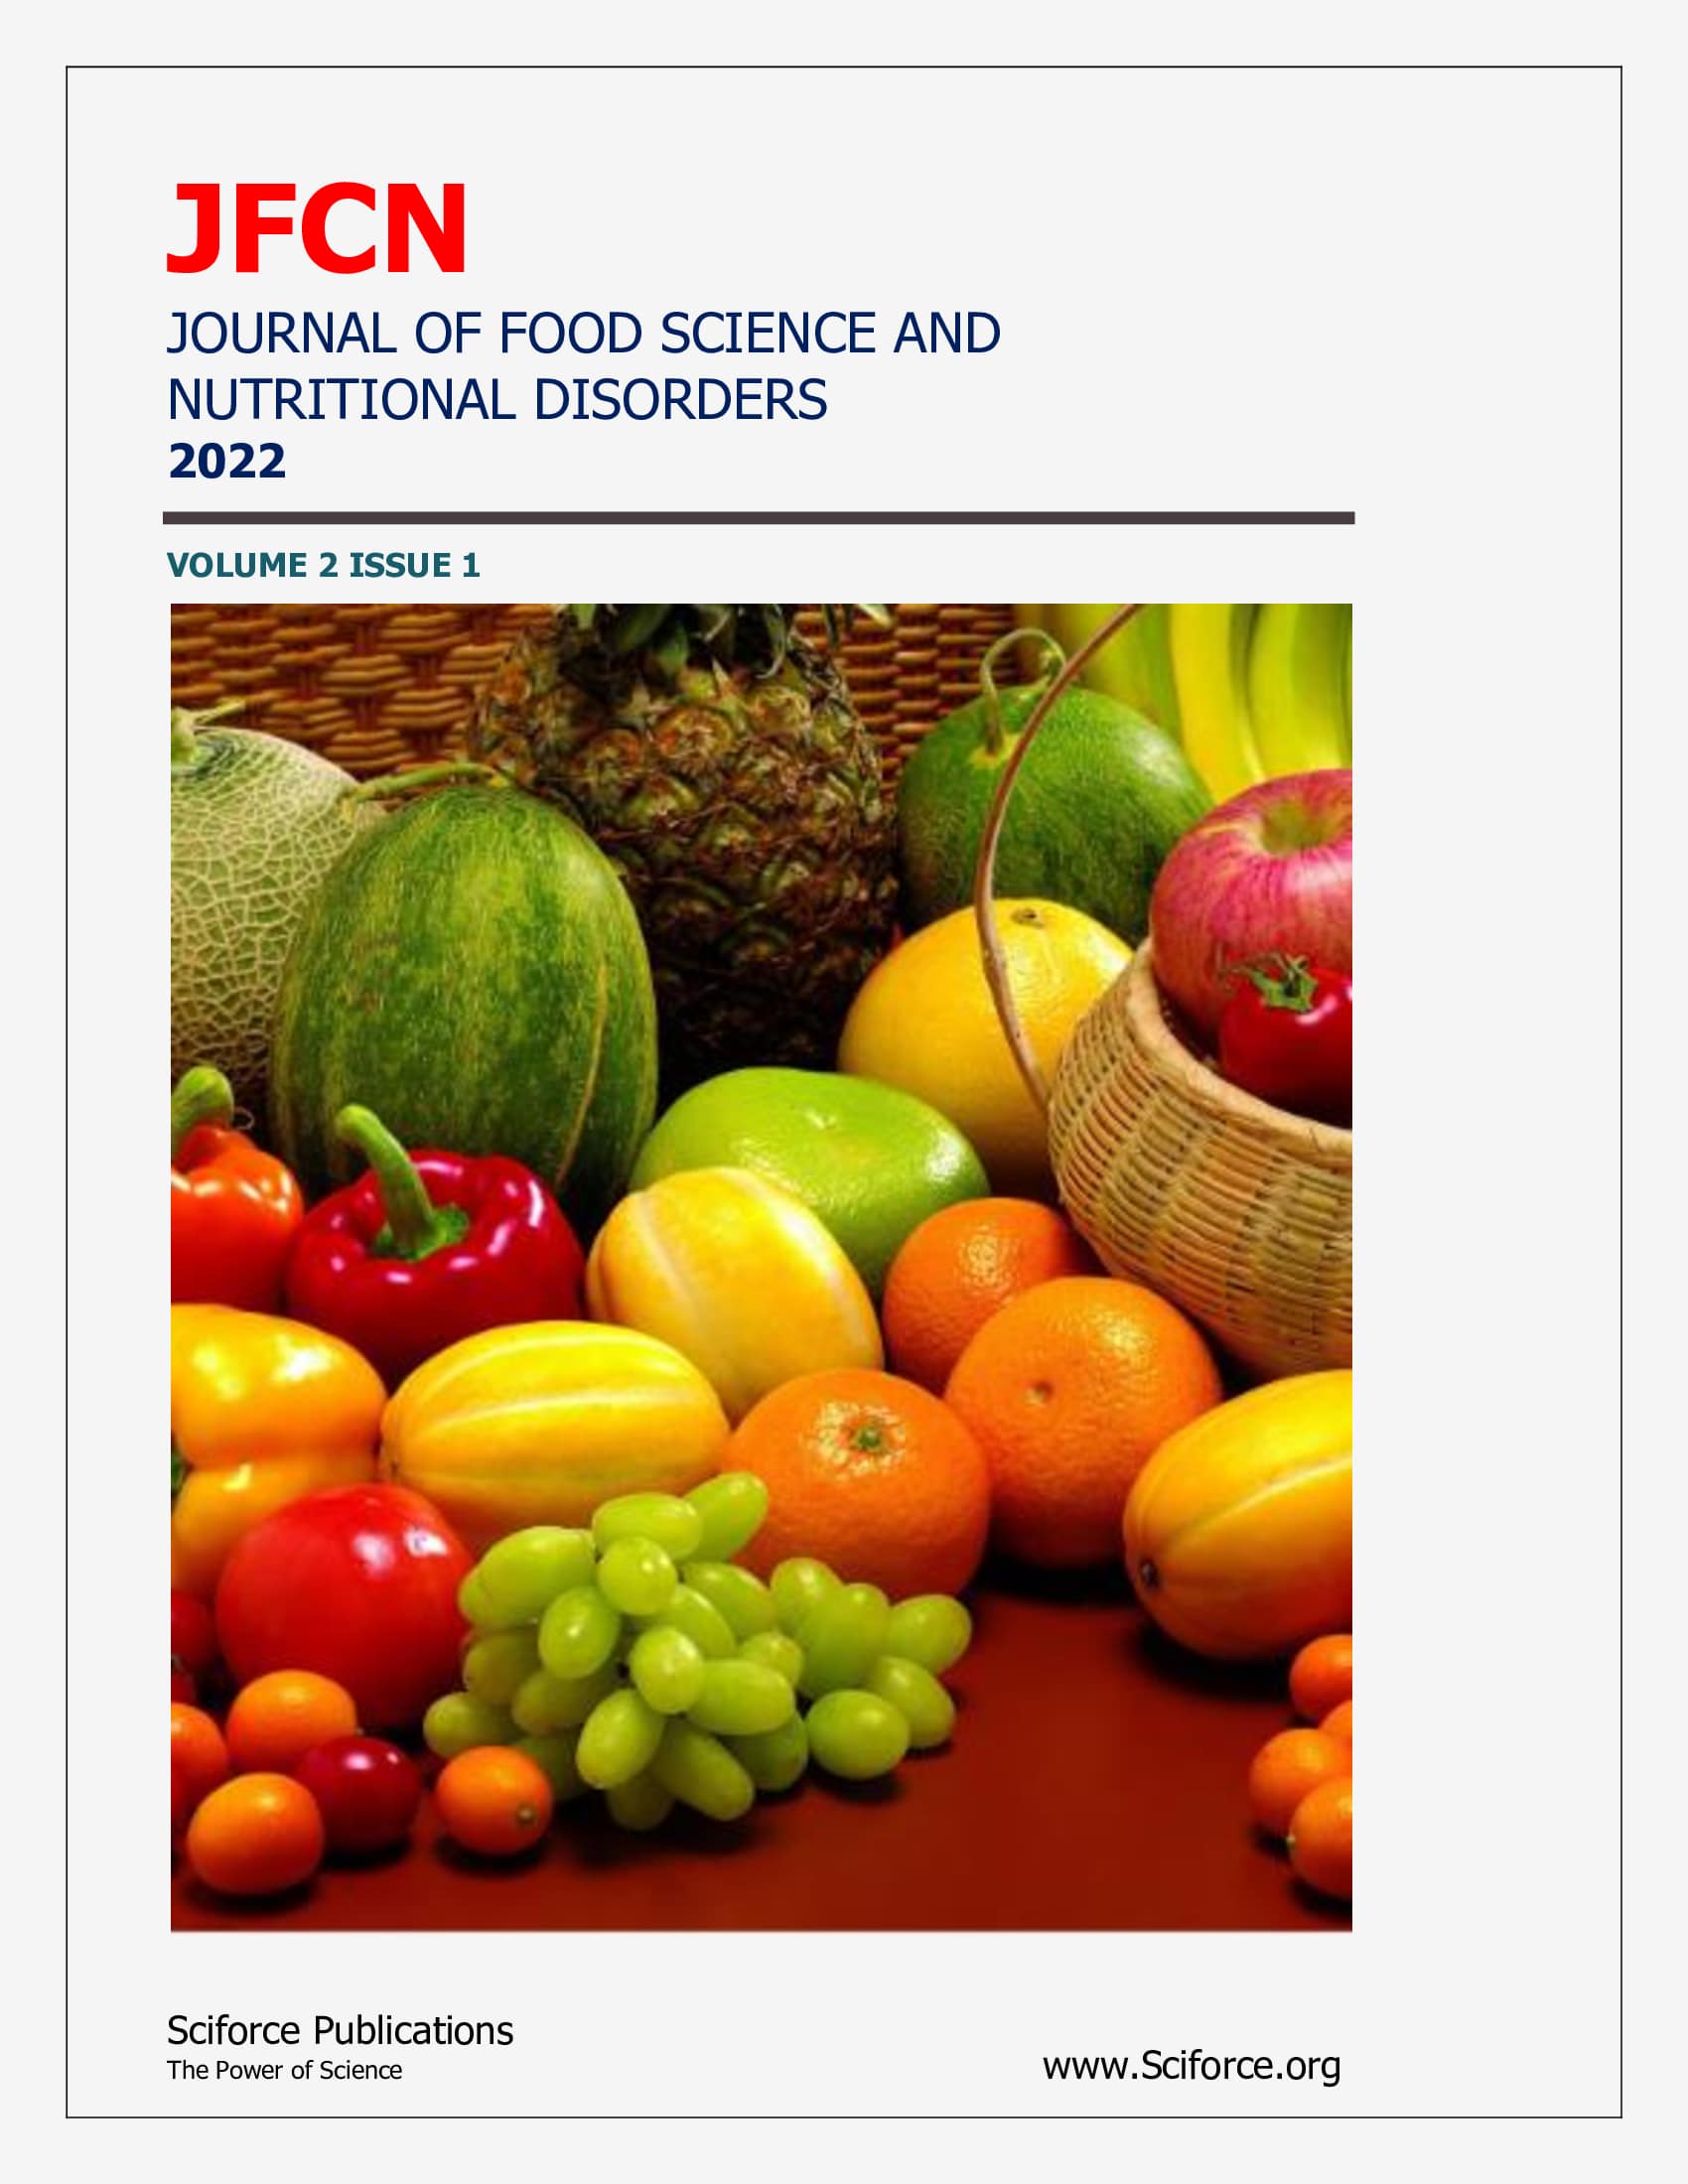 Journal of Food Science and Nutritional Disorders